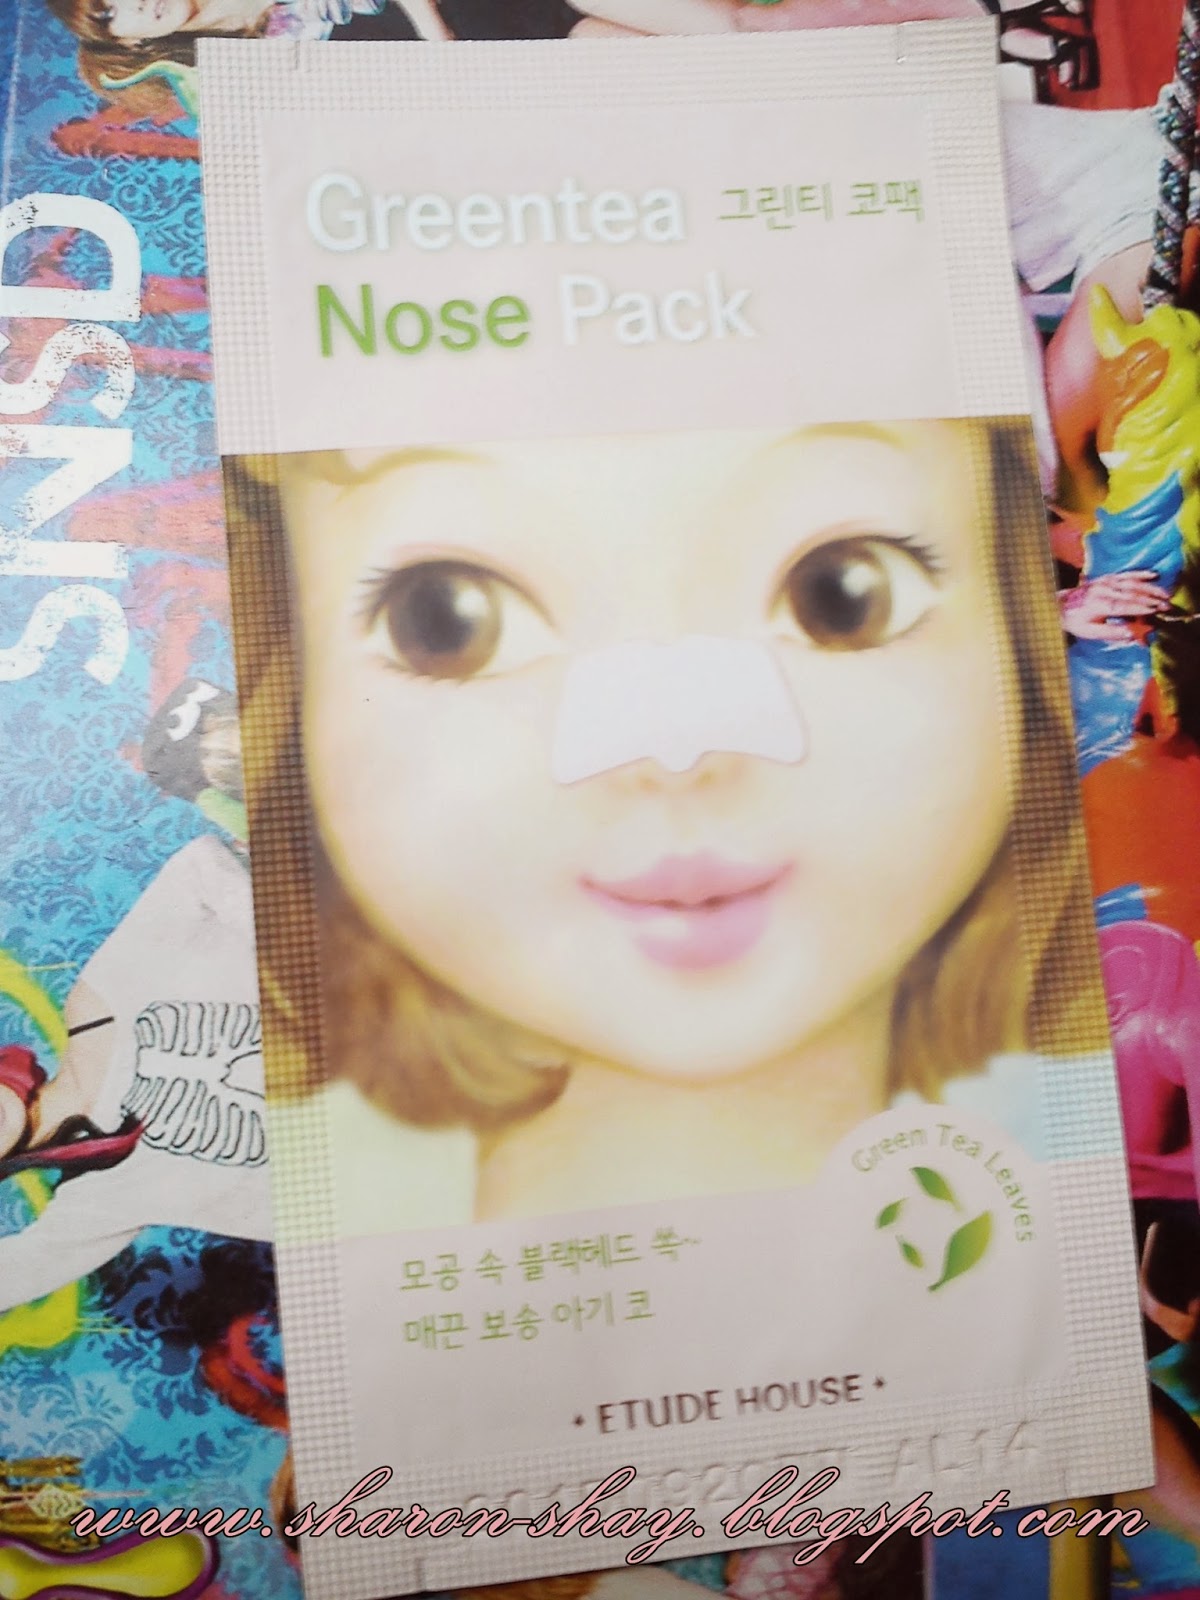 Sharon shay: [Review] Etude House Greentea Nose Pack